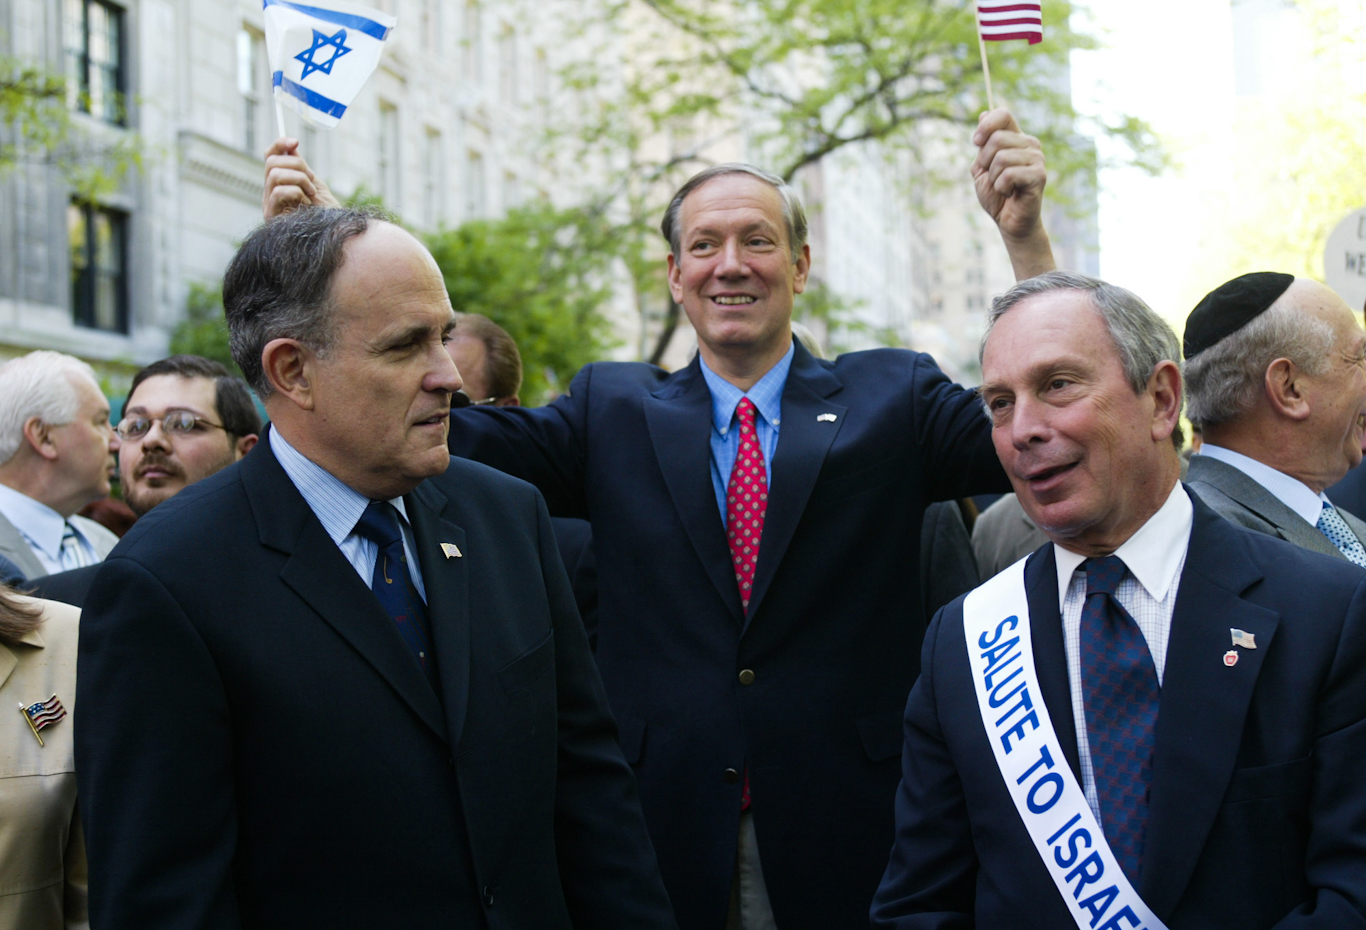 Rudy Giuliani, left, New York Gov. George Pataki, center, and Mike Bloomberg during a “Salute to Israel Parade, May 5, 2002, in New York. Shawn Baldwin | AP